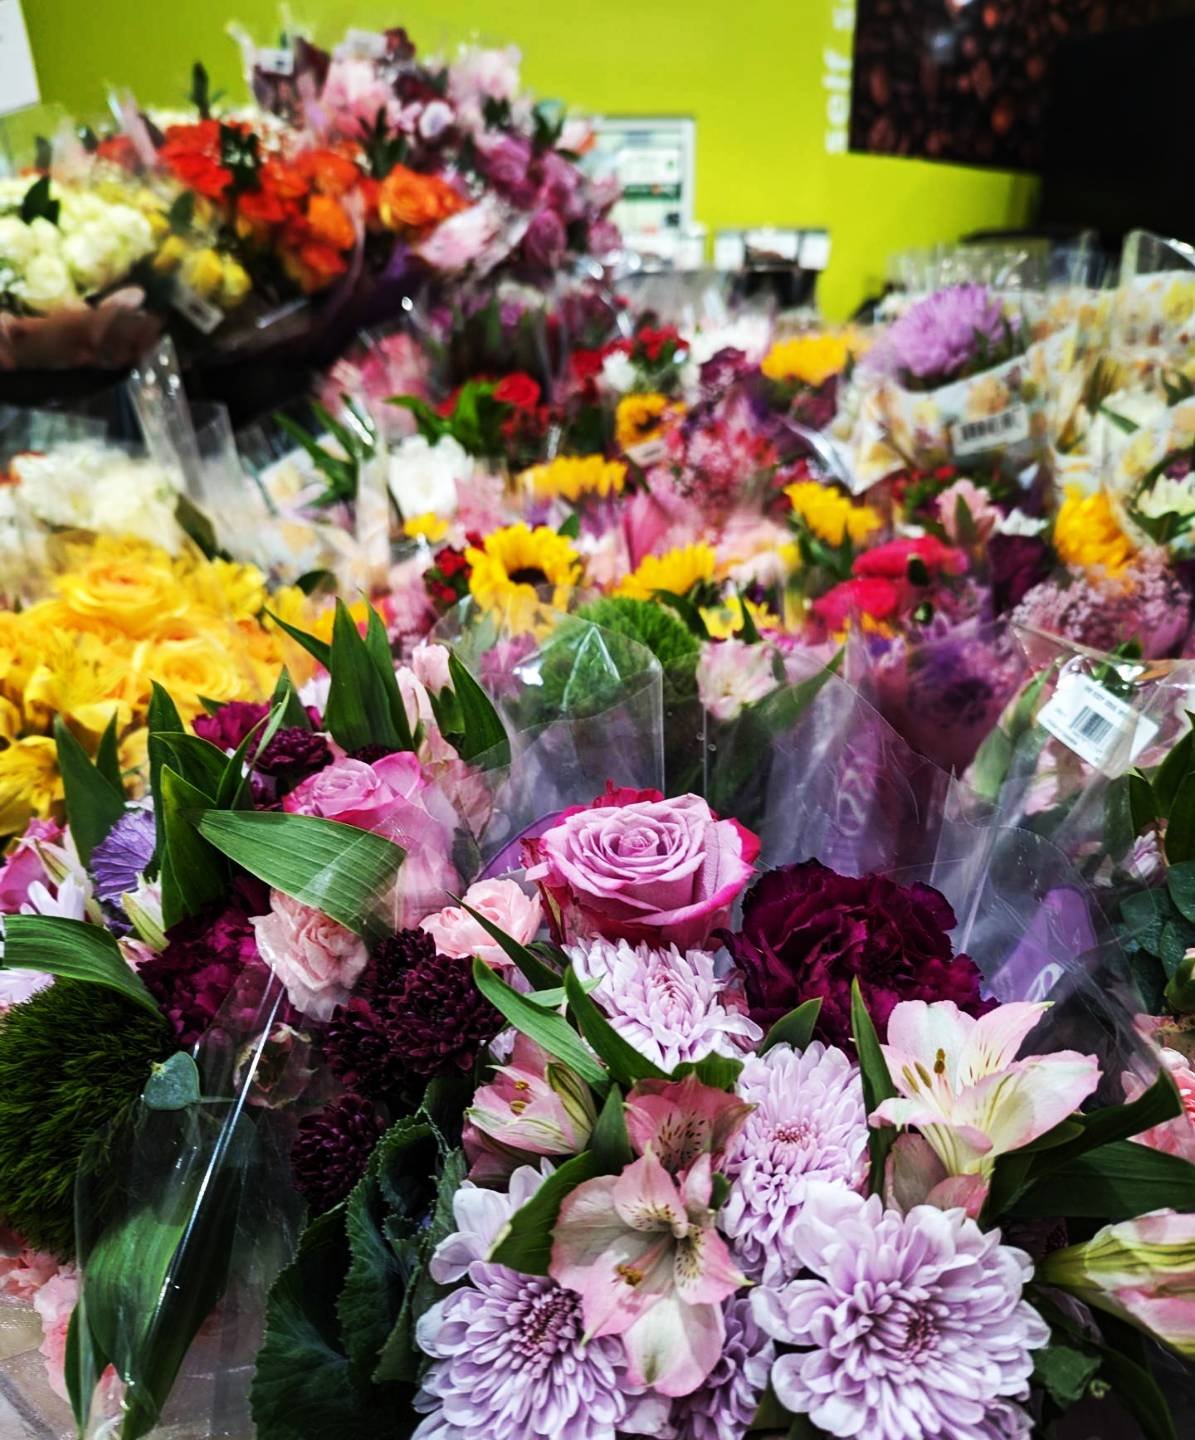 Find the perfect gift for Mom this weekend at the co-op! Fresh bouquets, #local giftcards, plants, and chocolate + pick up quiche, cakes, and chocolate covered strawberries from our bakery! 

#happymothersday #shopthecoop #shoplocal #spring